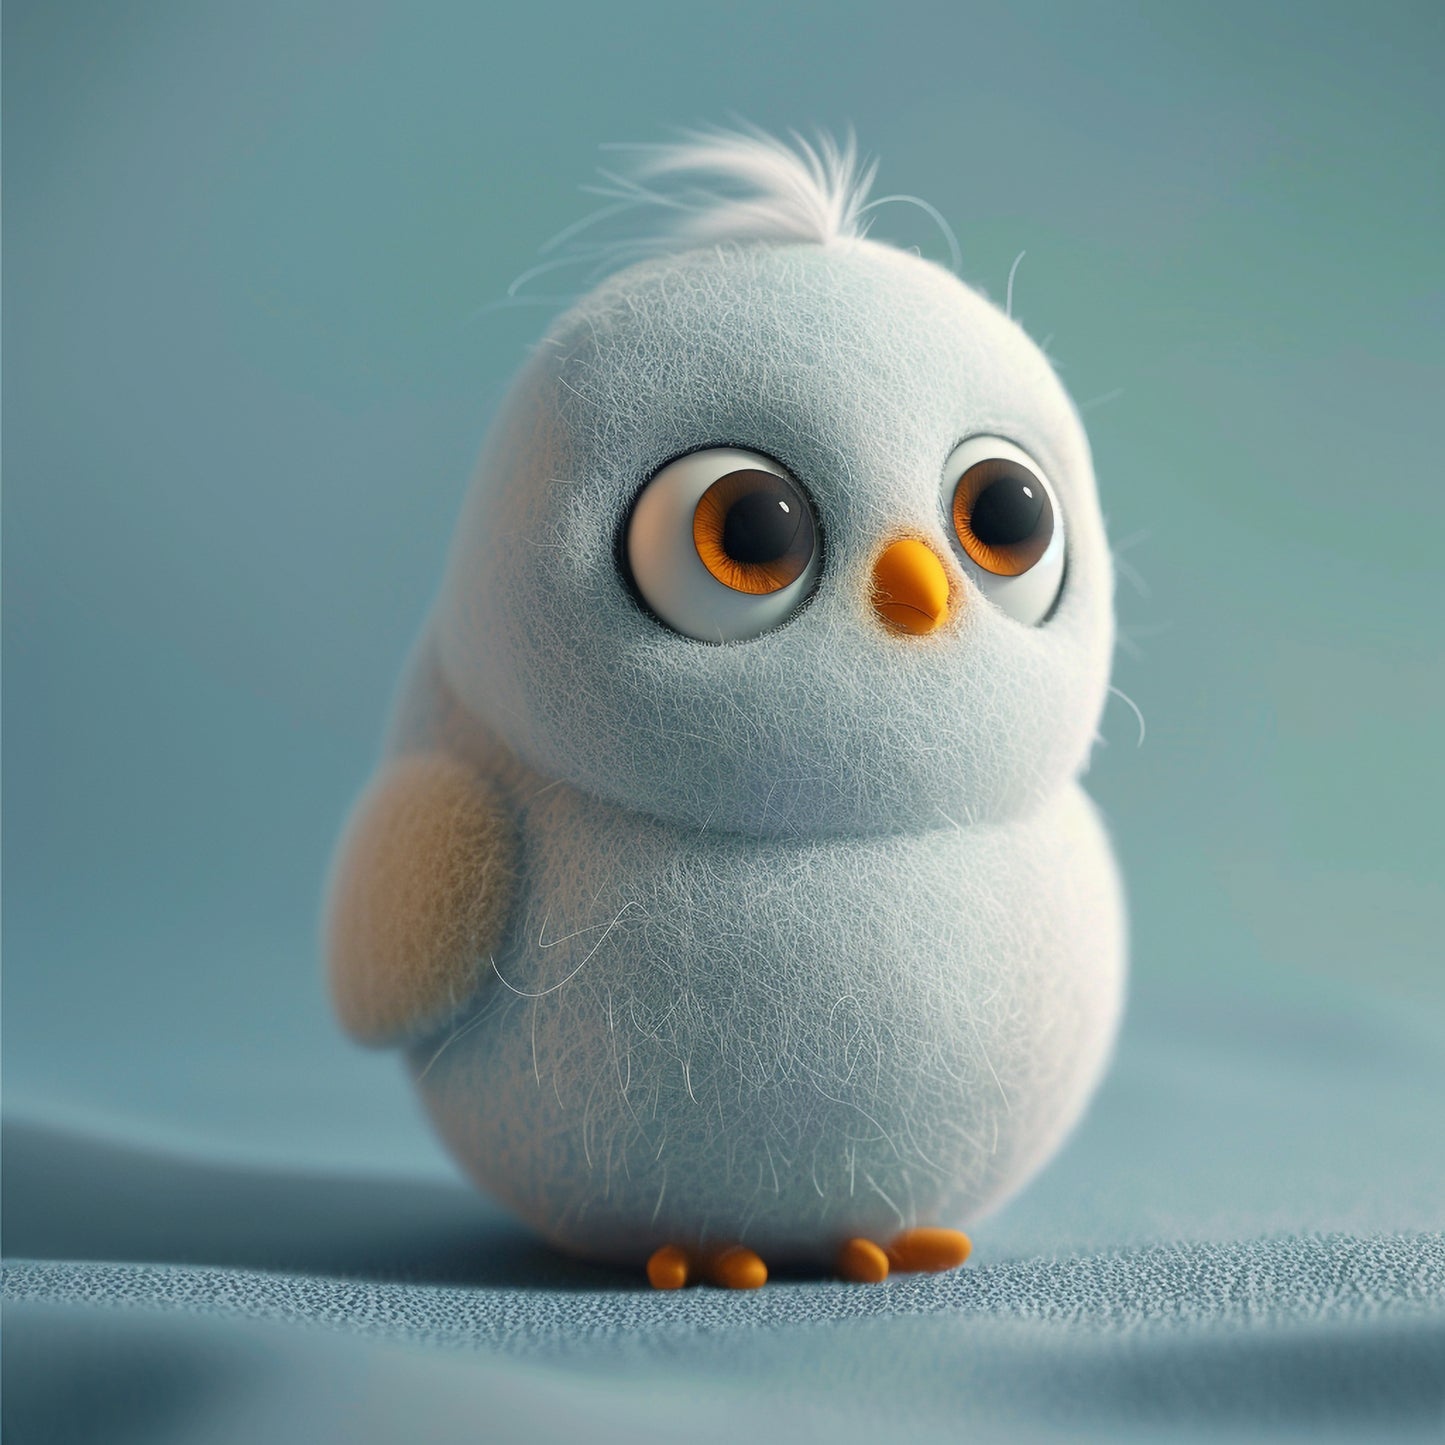 Adorable Needle Felted Pigeon with Big Eyes on Blue Background